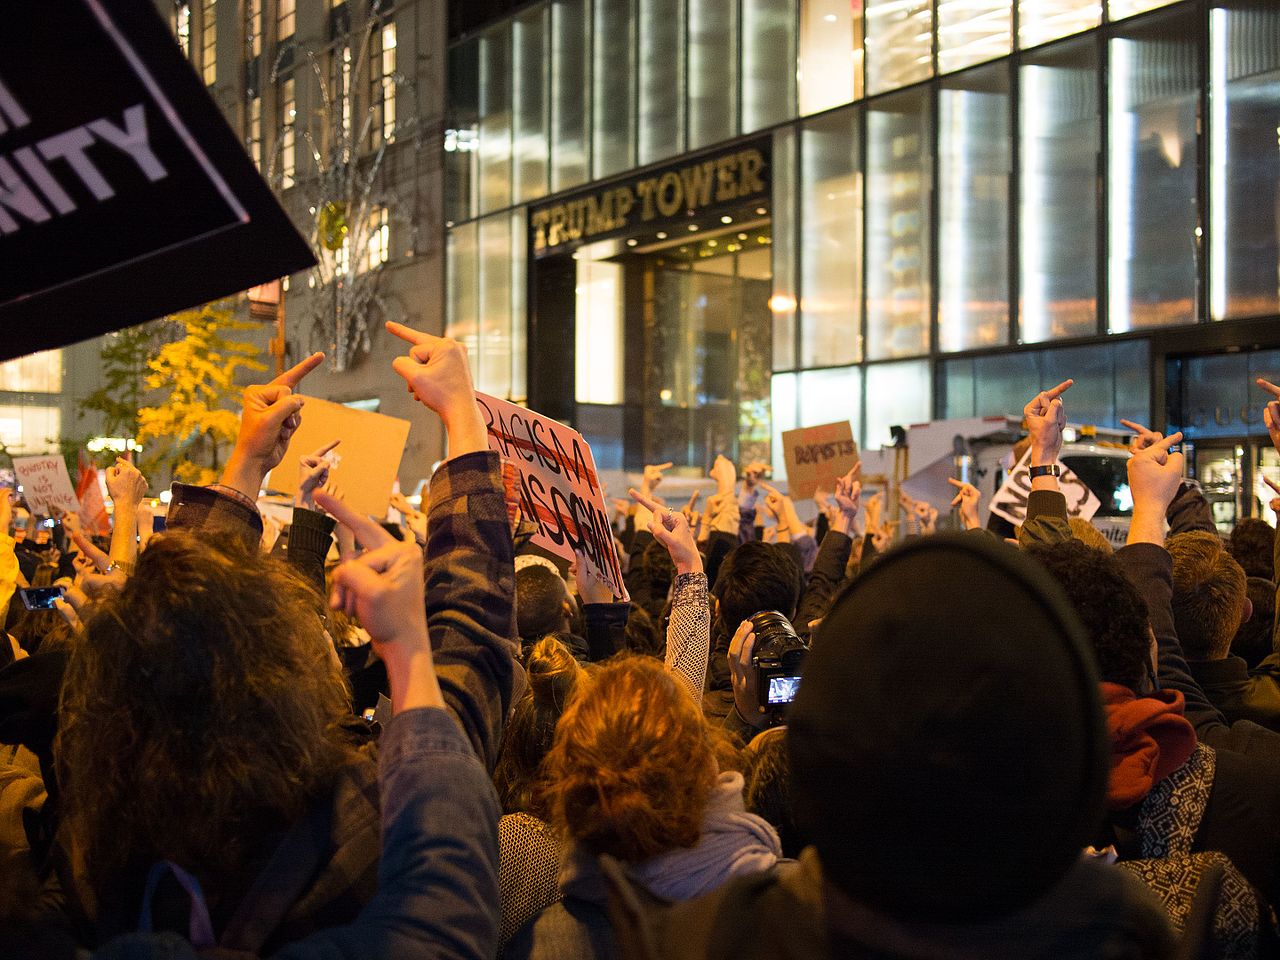 Protesters in Manhattan flip their middle fingers against the presidency of Donald Trump on November 9, 2016. (Photo by Rhododendrites/Wikimedia Commons)